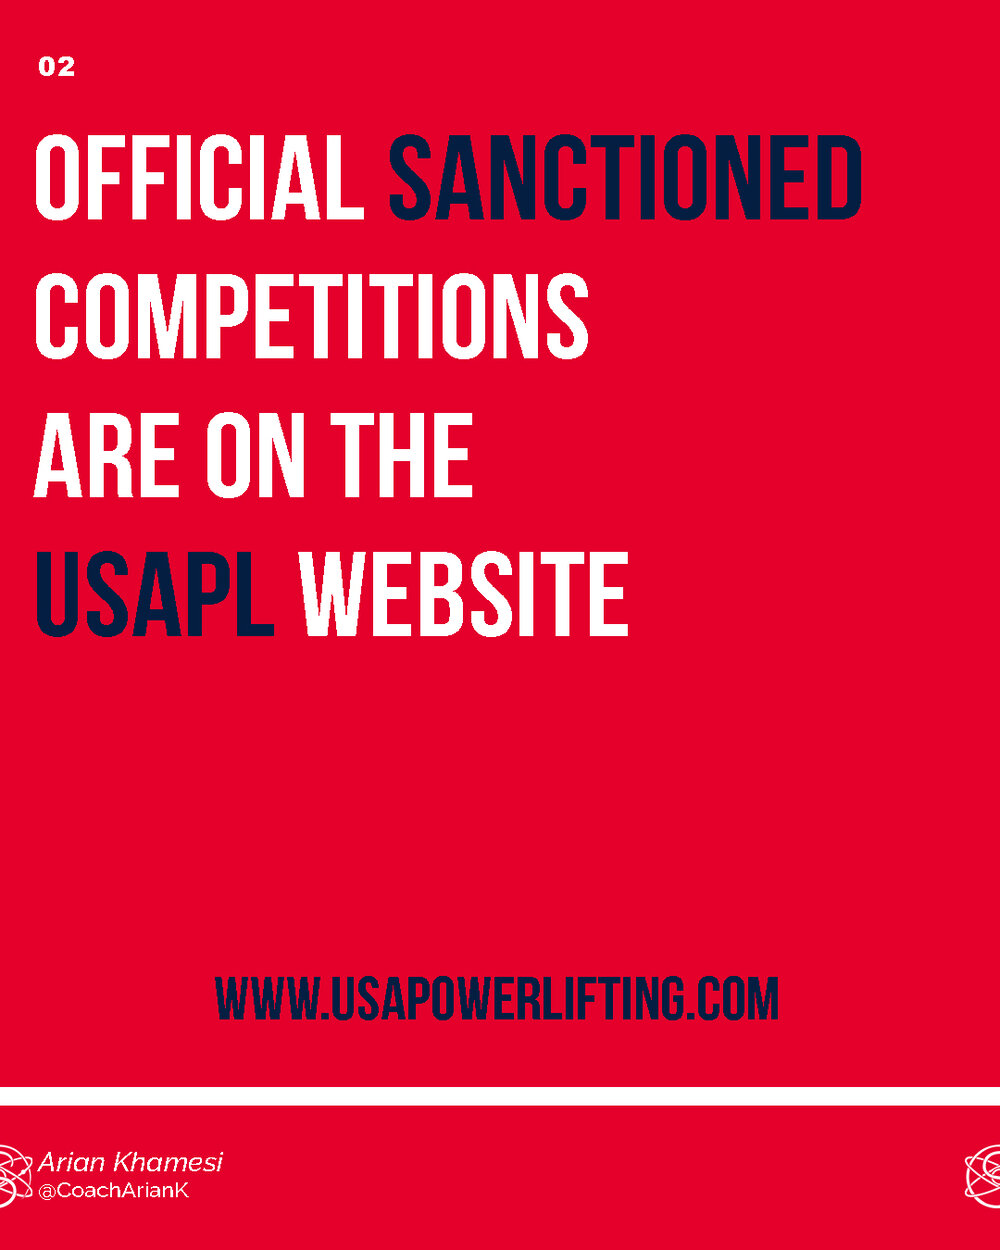 Competing-in-USAPL_02.jpg